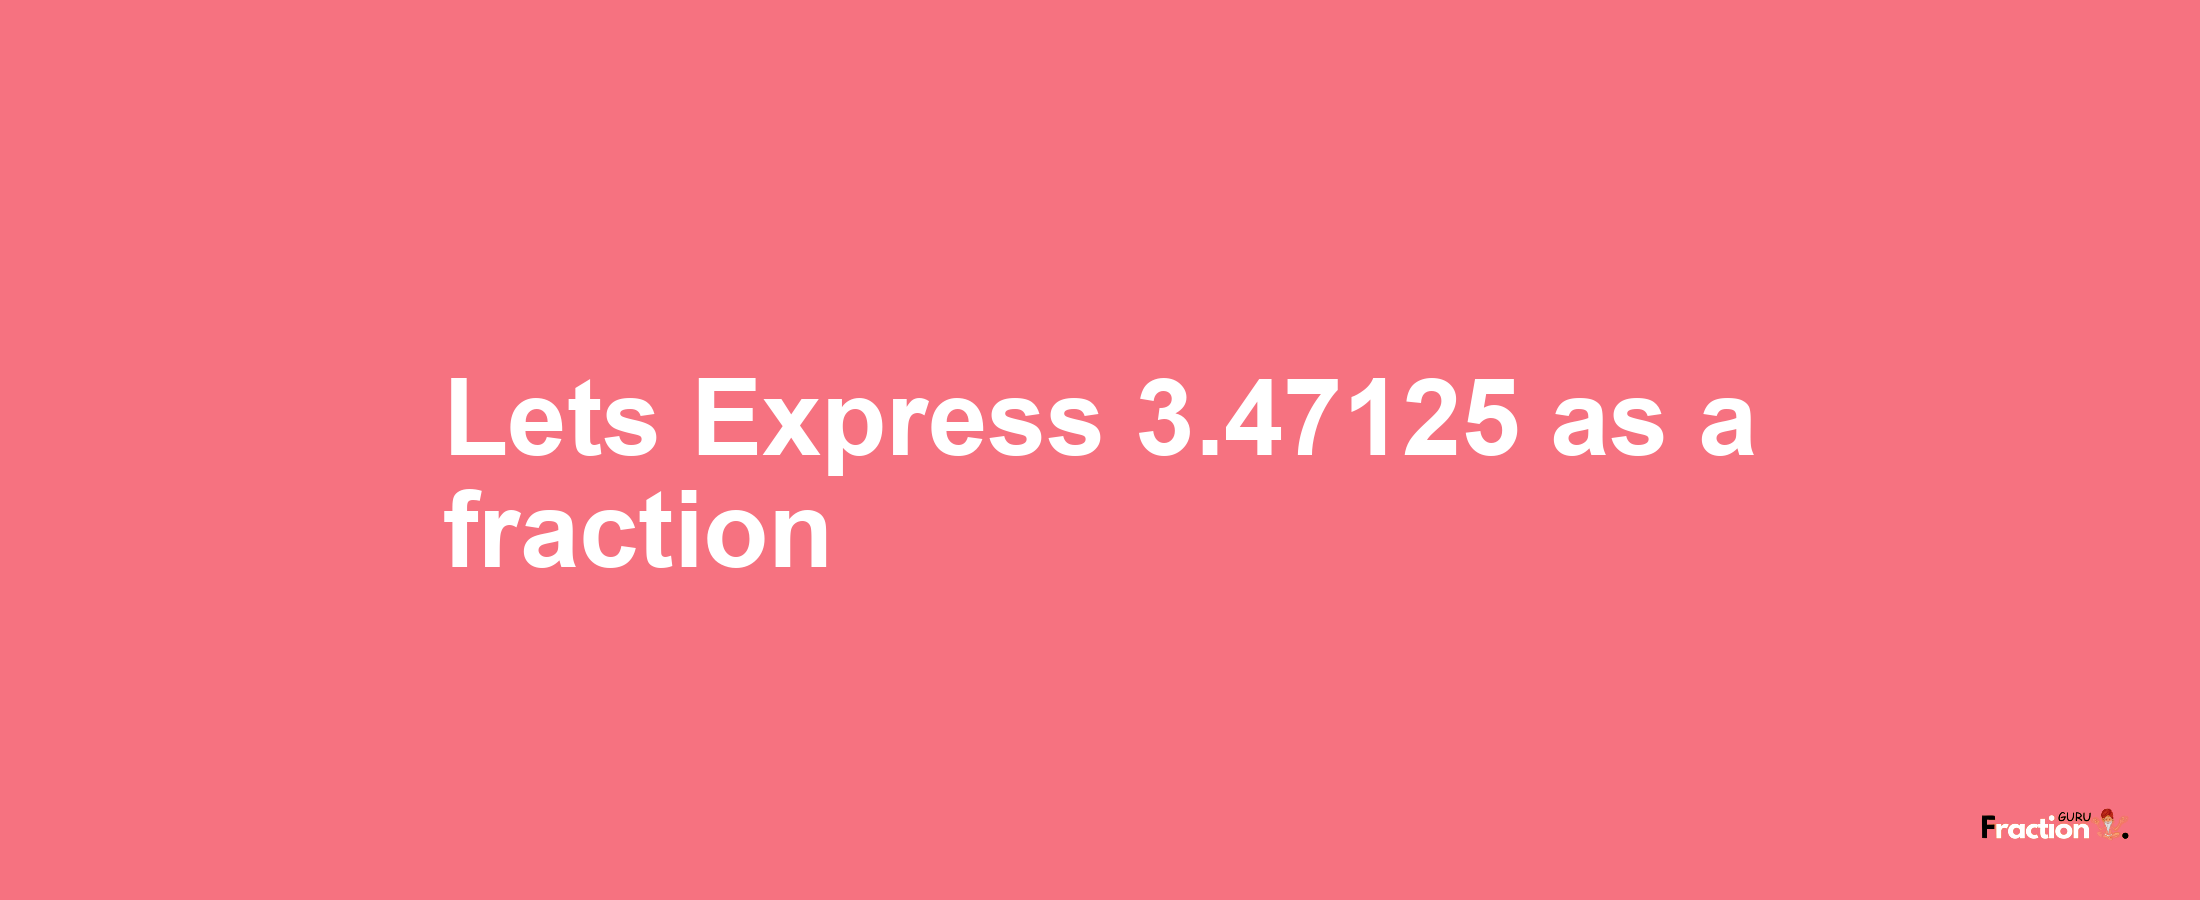 Lets Express 3.47125 as afraction